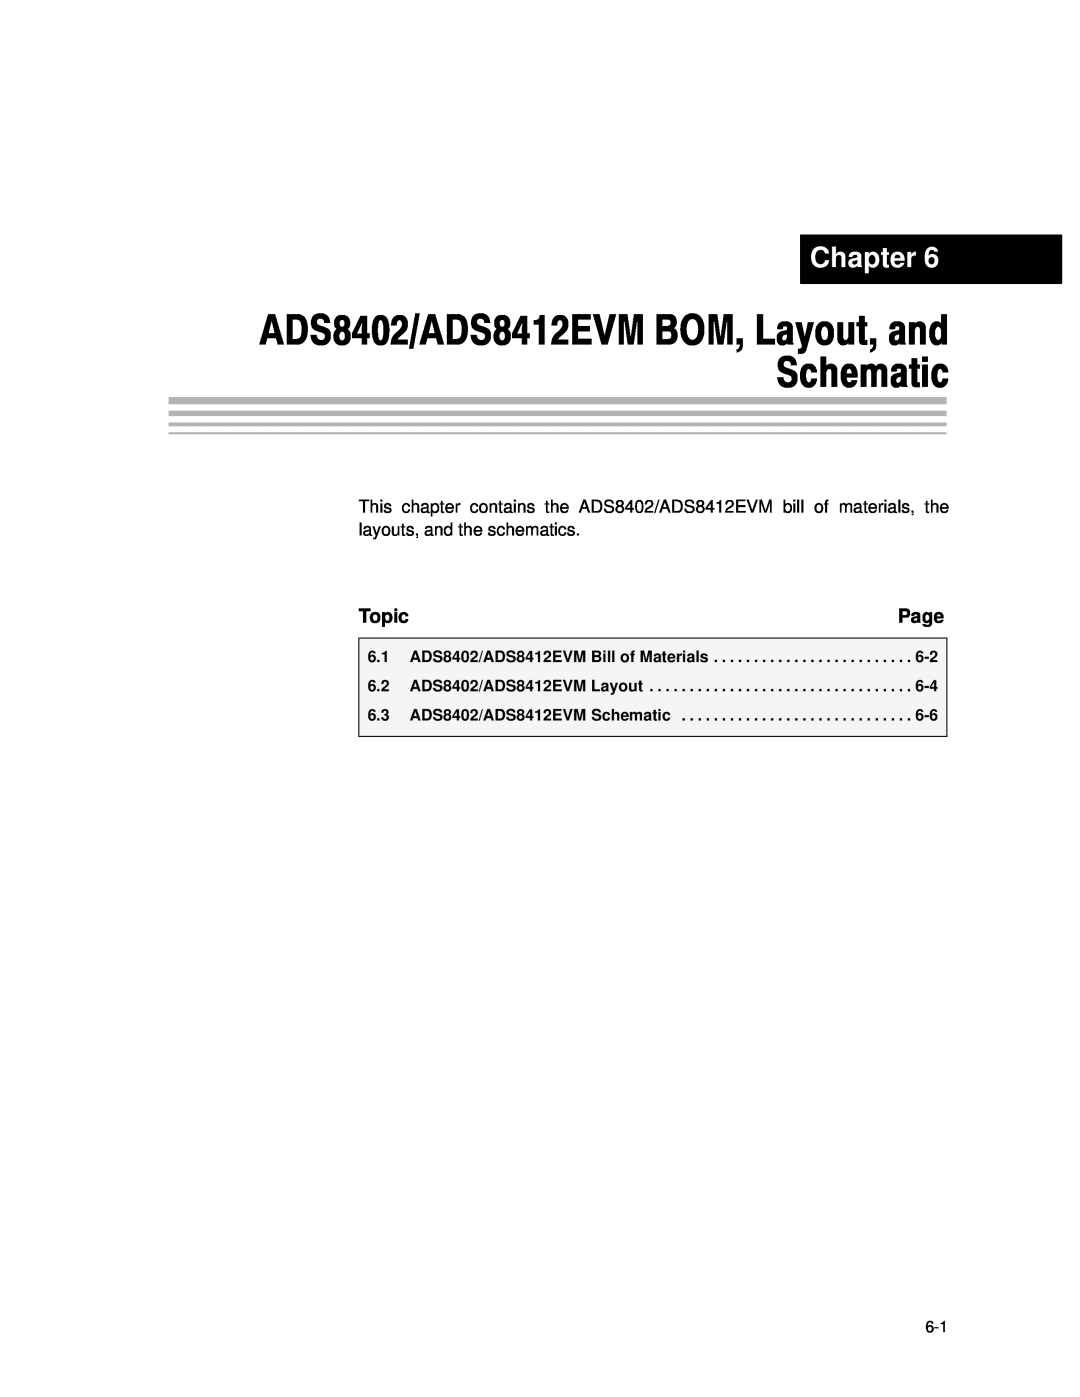 Texas Instruments ADS8402 EVM, ADS8412 EVM manual ADS8402/ADS8412EVM BOM, Layout, and Schematic, Chapter, Page, Topic 